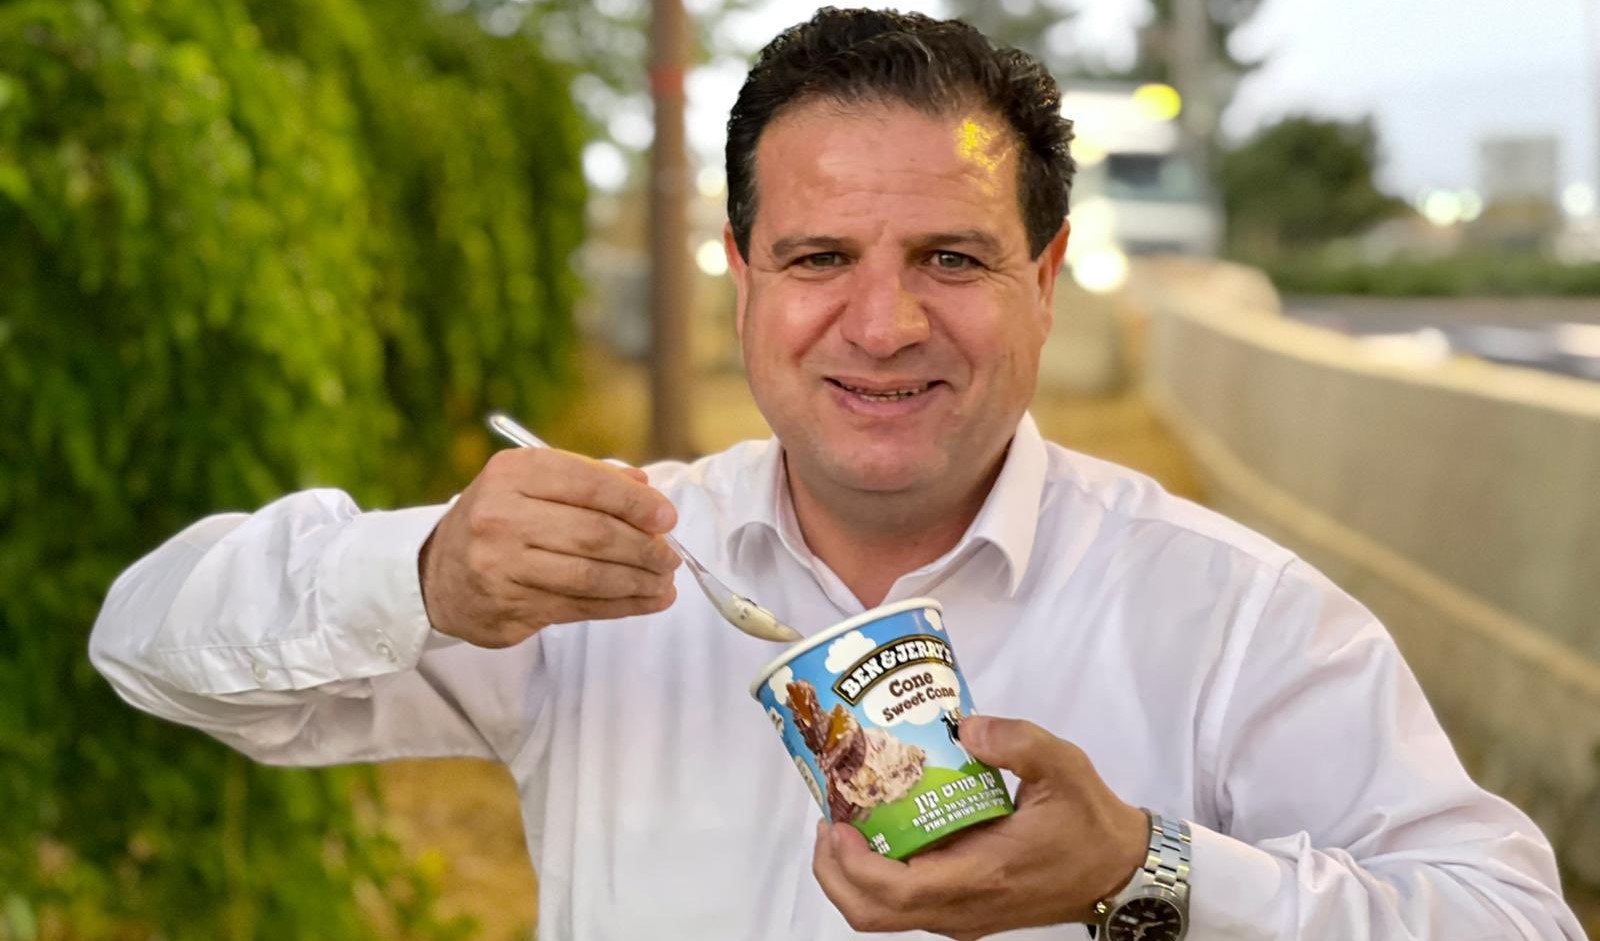 Hadash MK Ayman Odeh, leader of the Joint List, tweeted this photograph of himself eating a tub of Ben & Jerry’s "Cone Sweet Cone" ice cream, Tuesday, July 13.